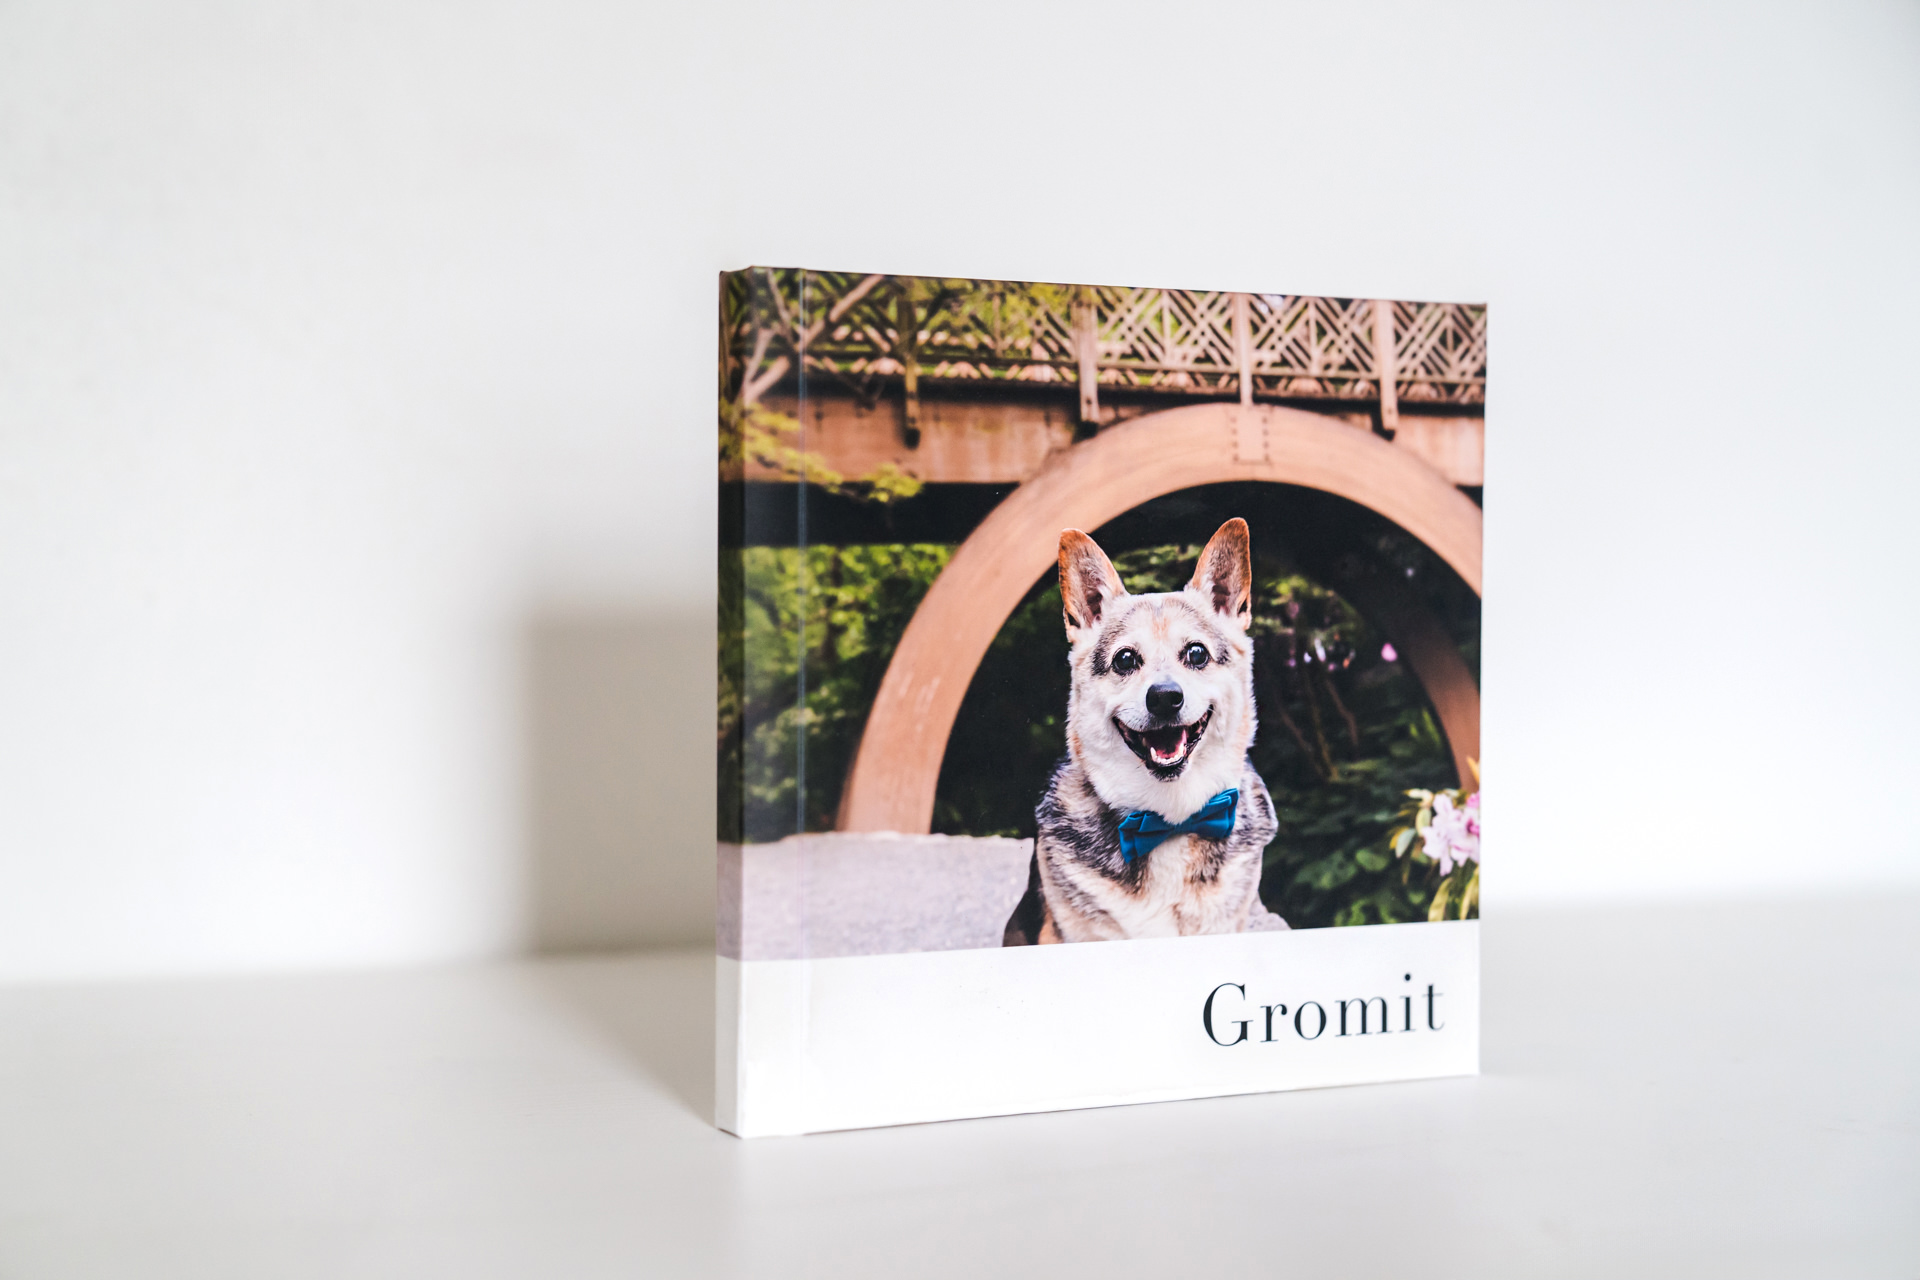 Printed photo book featuring smiling dog named Gromit.